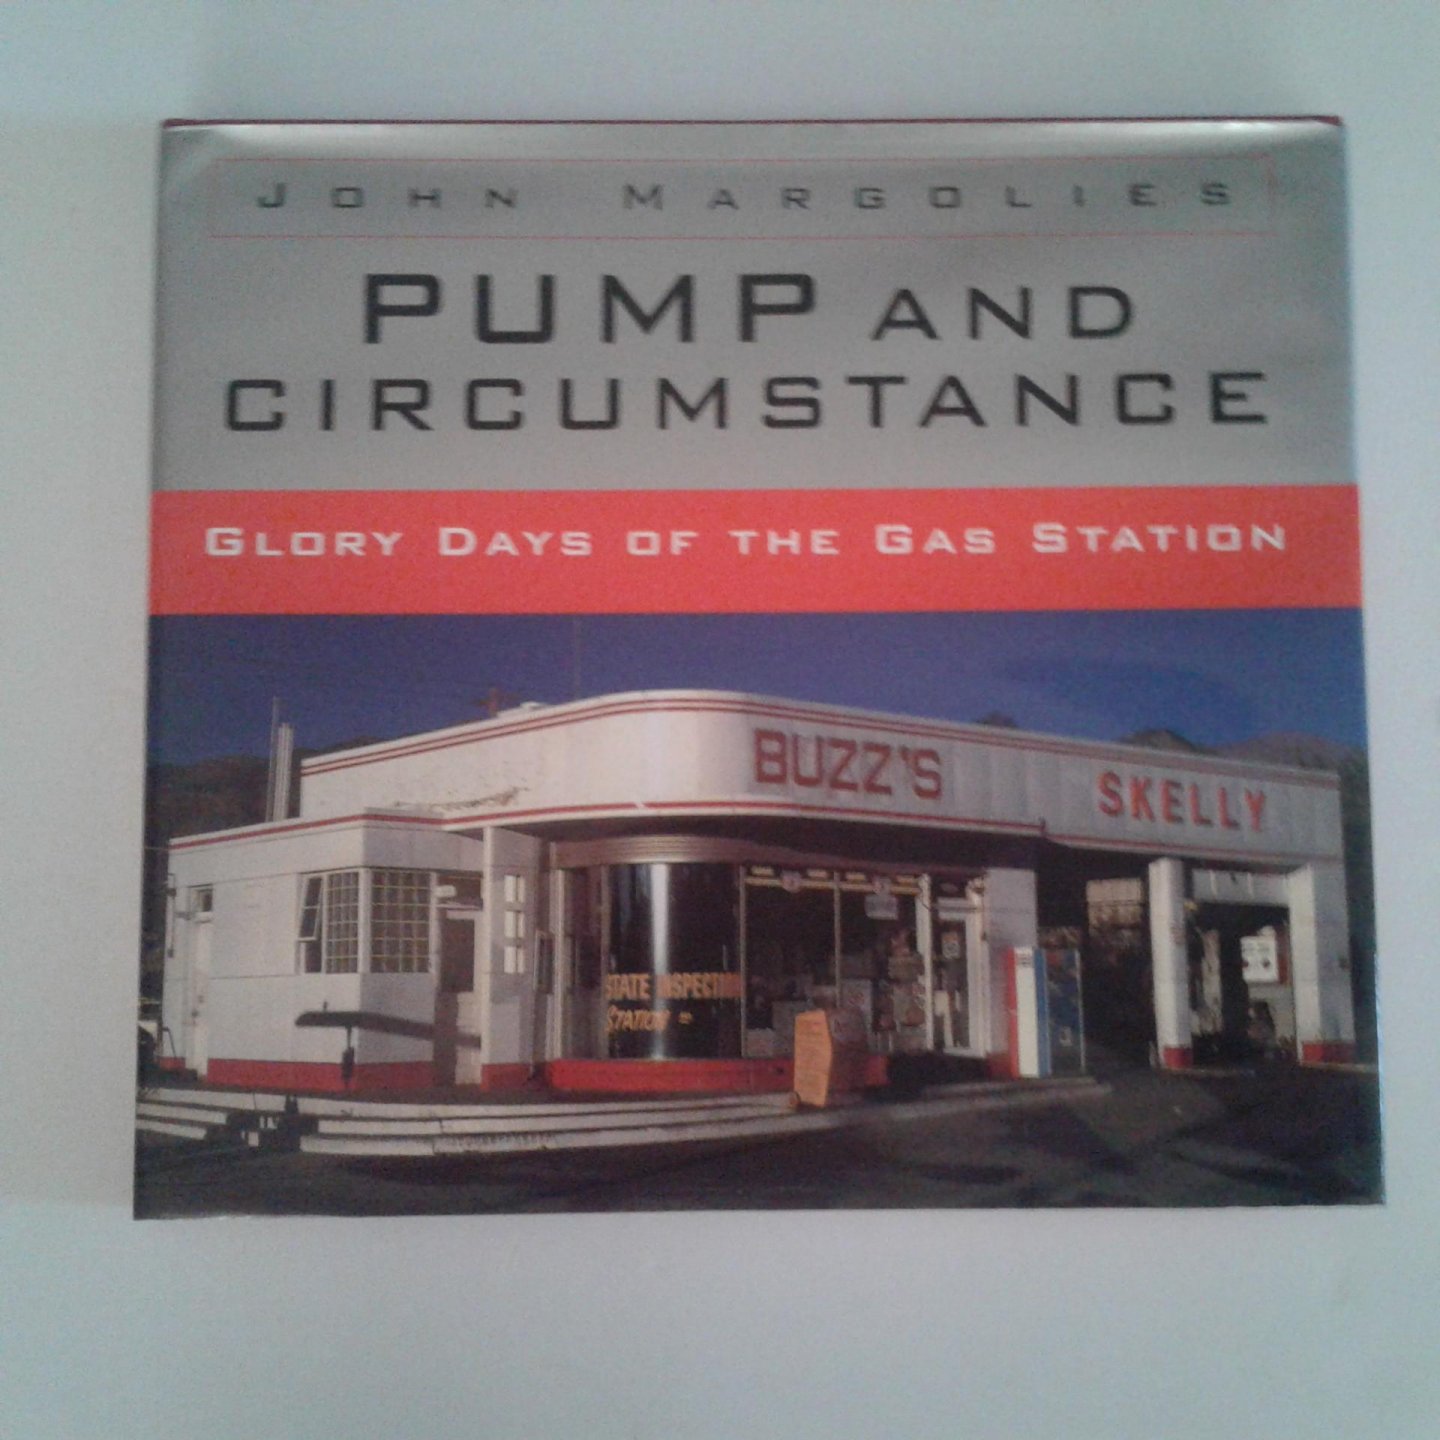 Margolies, John - Pump and Circumstance ; Glory days of the Gas Station